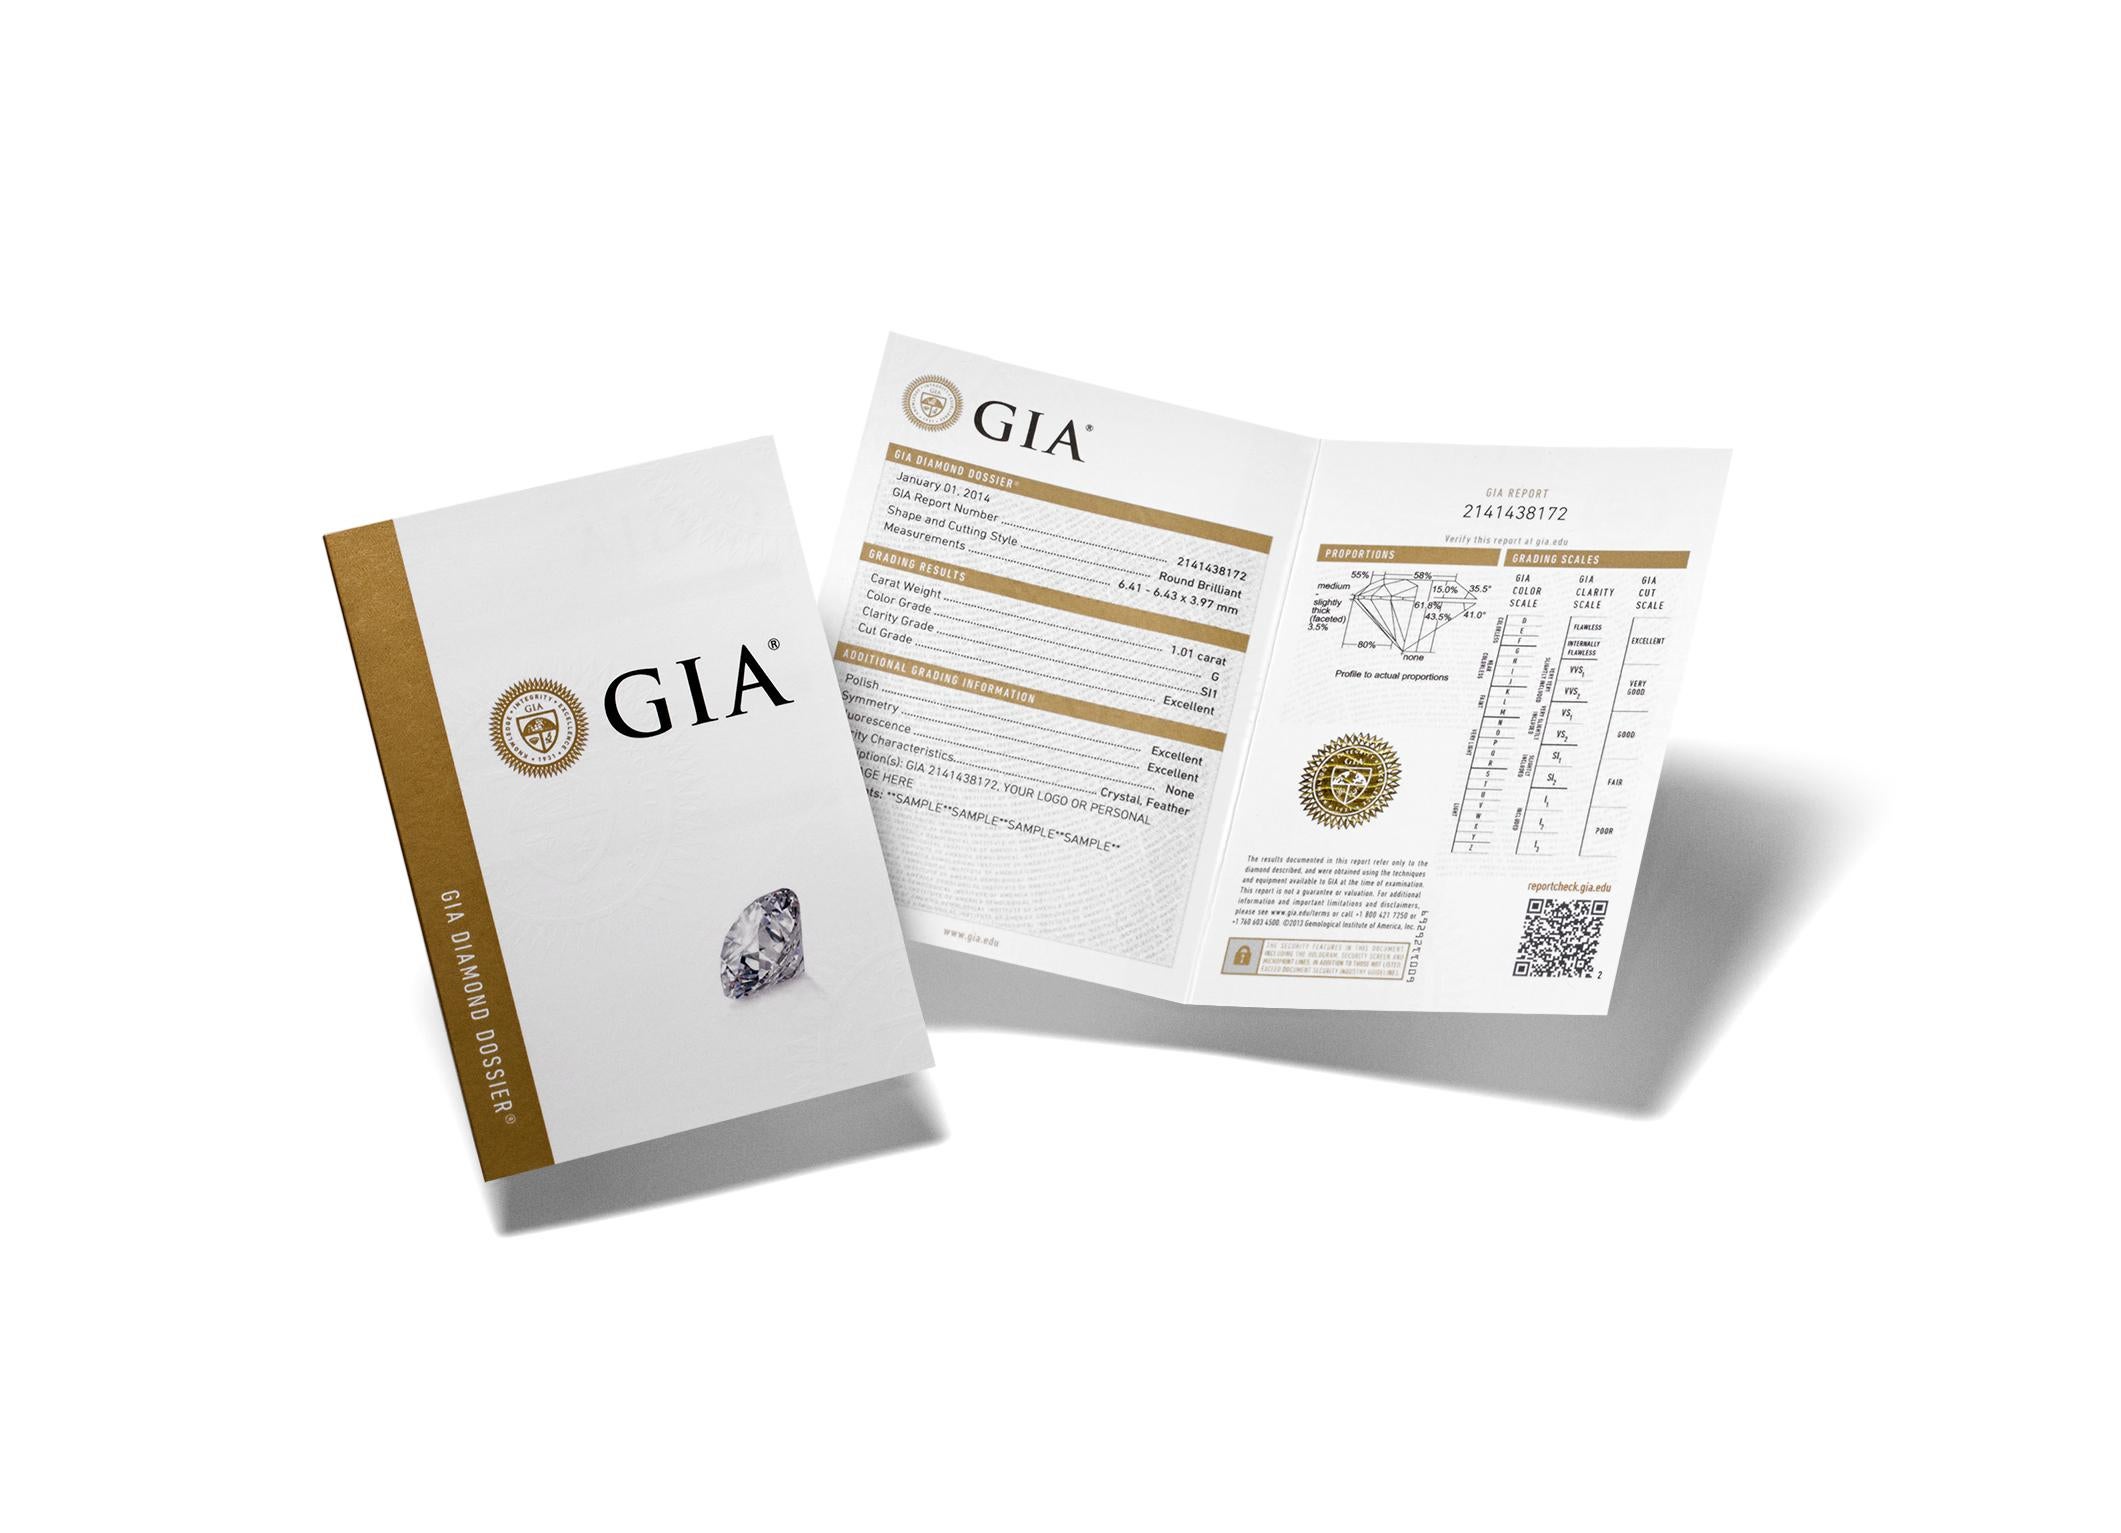 GIA Certified 0.50 Carat, G/VVS2, Brilliant Cut, Excellent Natural Diamond

Perfect Brilliants for perfect gifts.

5 C's:

Certificate: GIA
Carat: 0.50ct
Color: G
Clarity: VVS2(Very Very Slightly Included)
Cut: Excellent

Polish: Excellent
Symmetry: